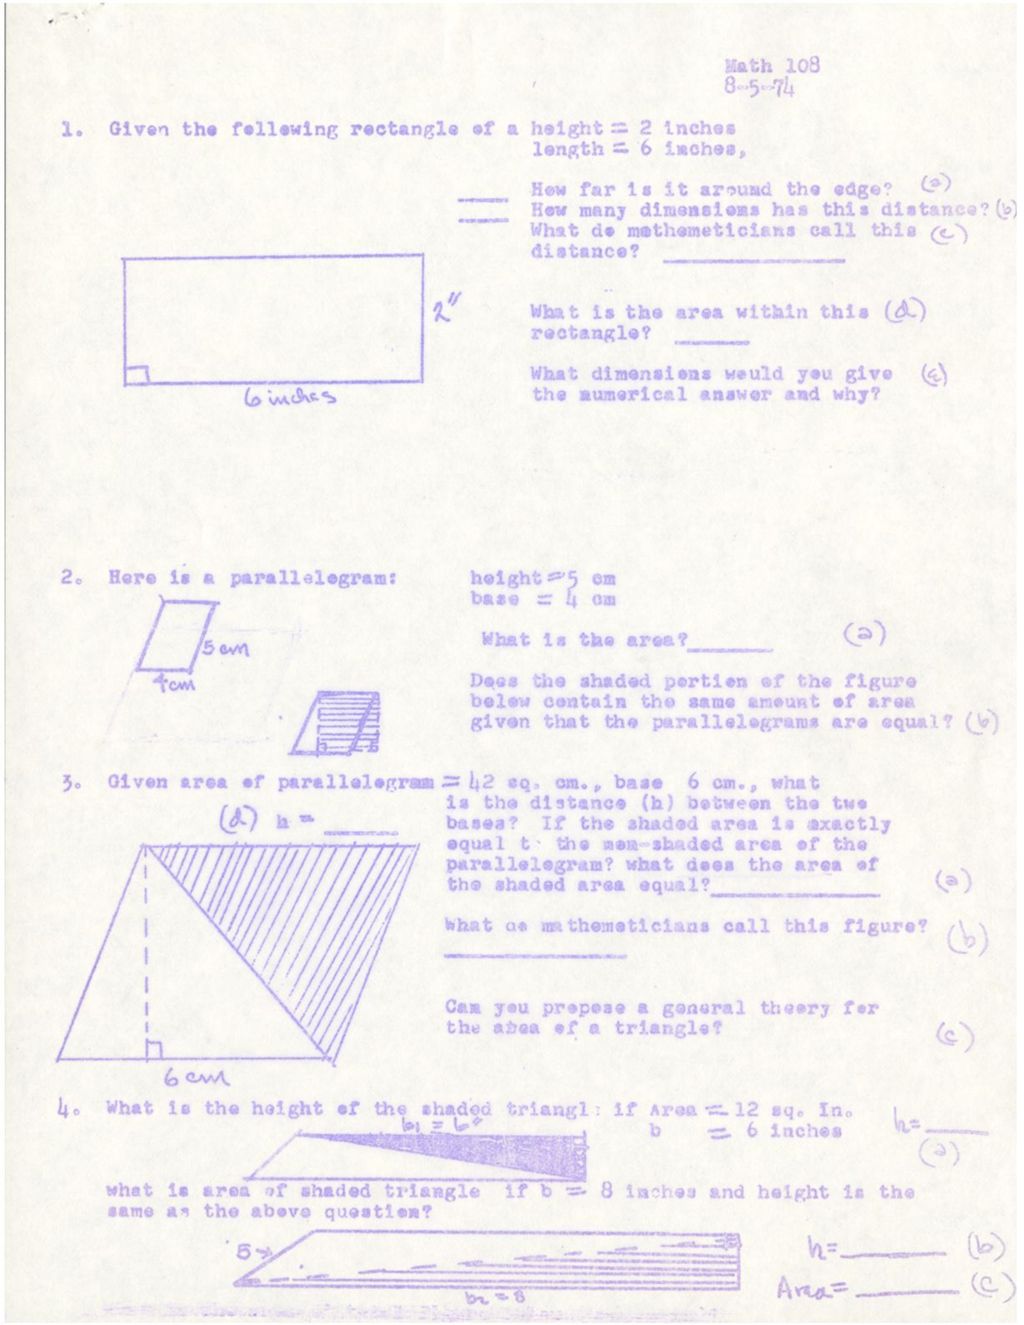 Miniature of Problems with rectangles, trapezoids, etc. Math 108 8-5-1974